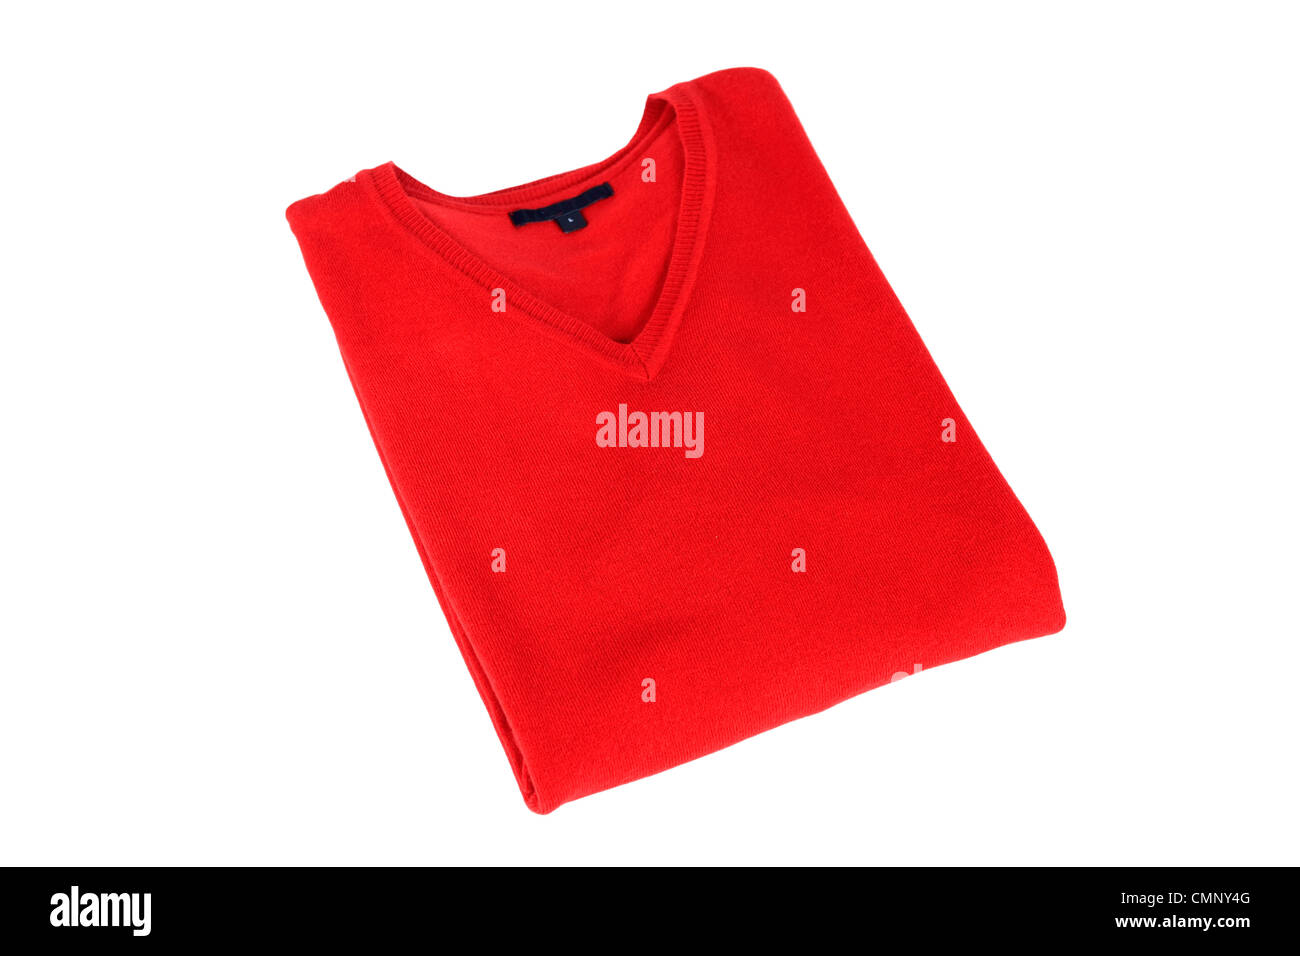 A folded red man's sweater on a white background Stock Photo - Alamy